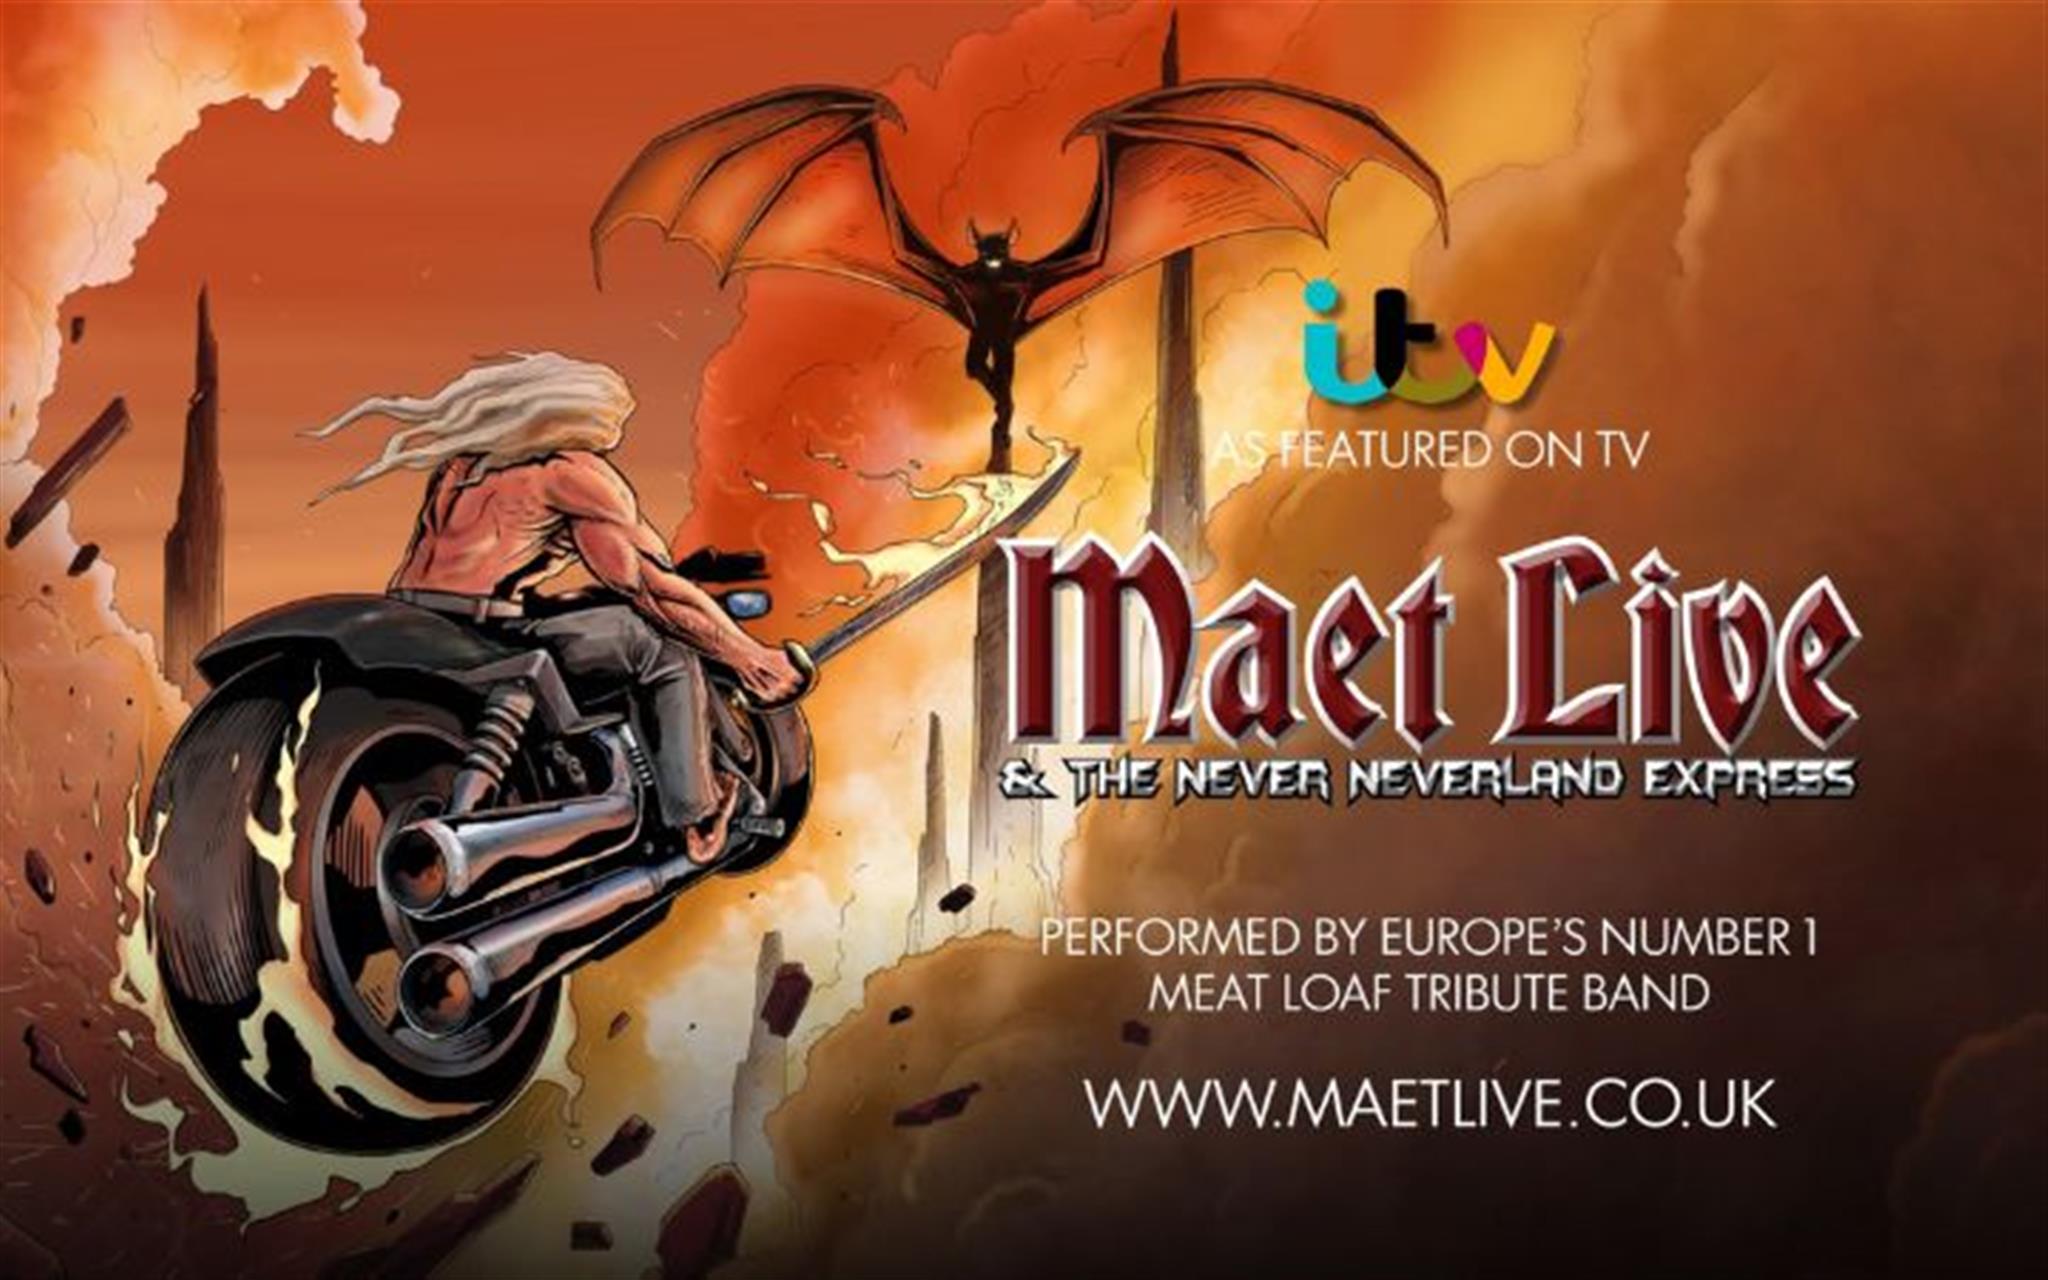 Maet Live & The Never Neverland Express image